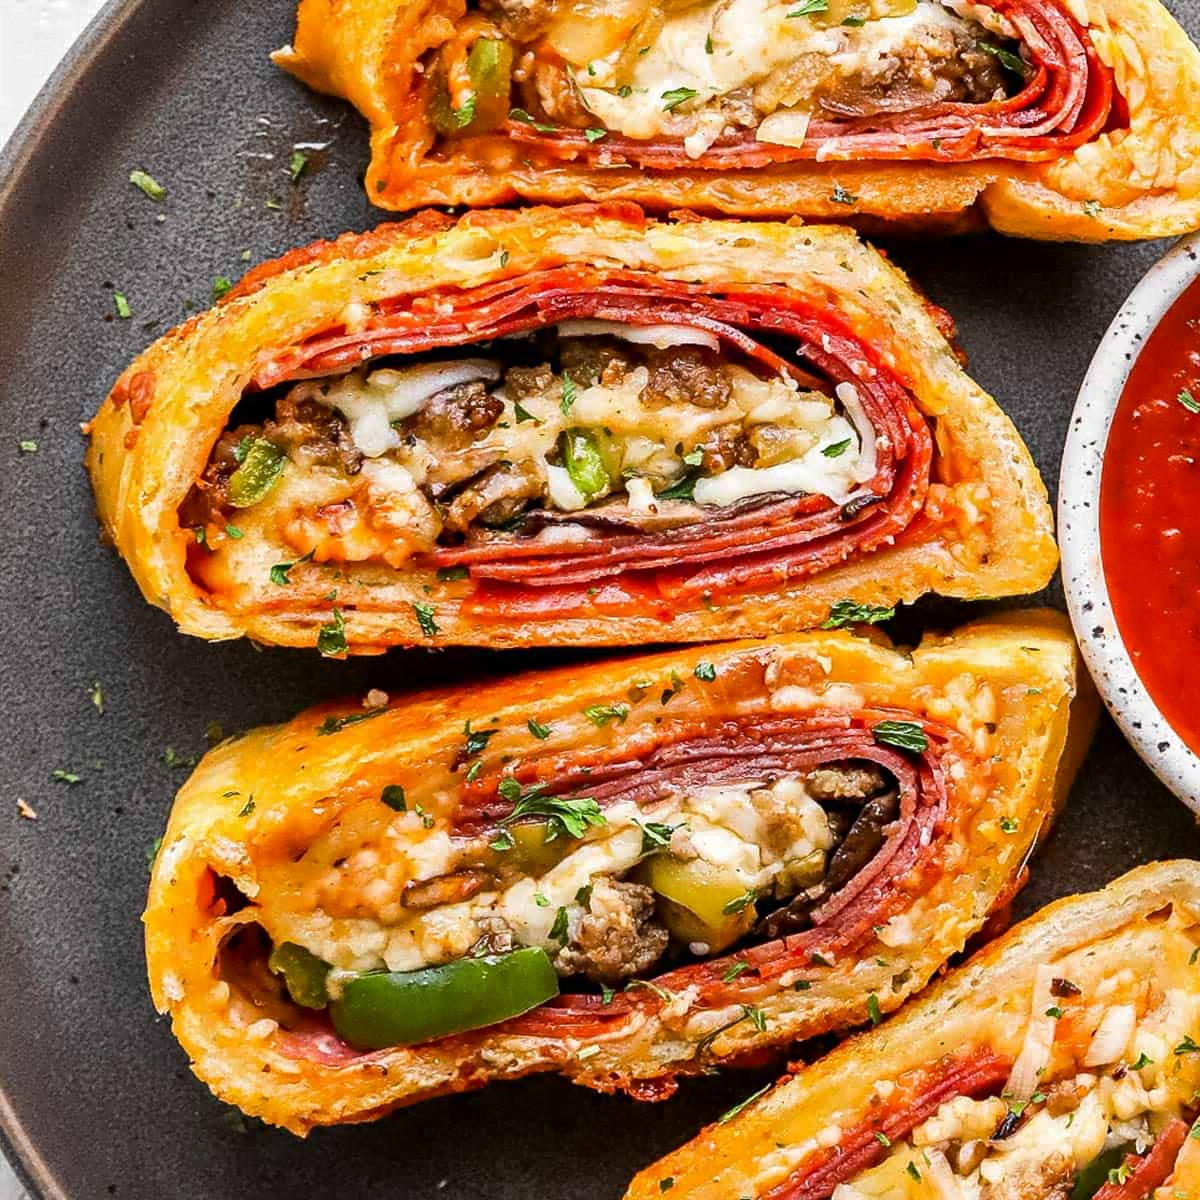 https://www.brooklyncraftpizza.com/blog/what-to-make-with-pizza-dough/